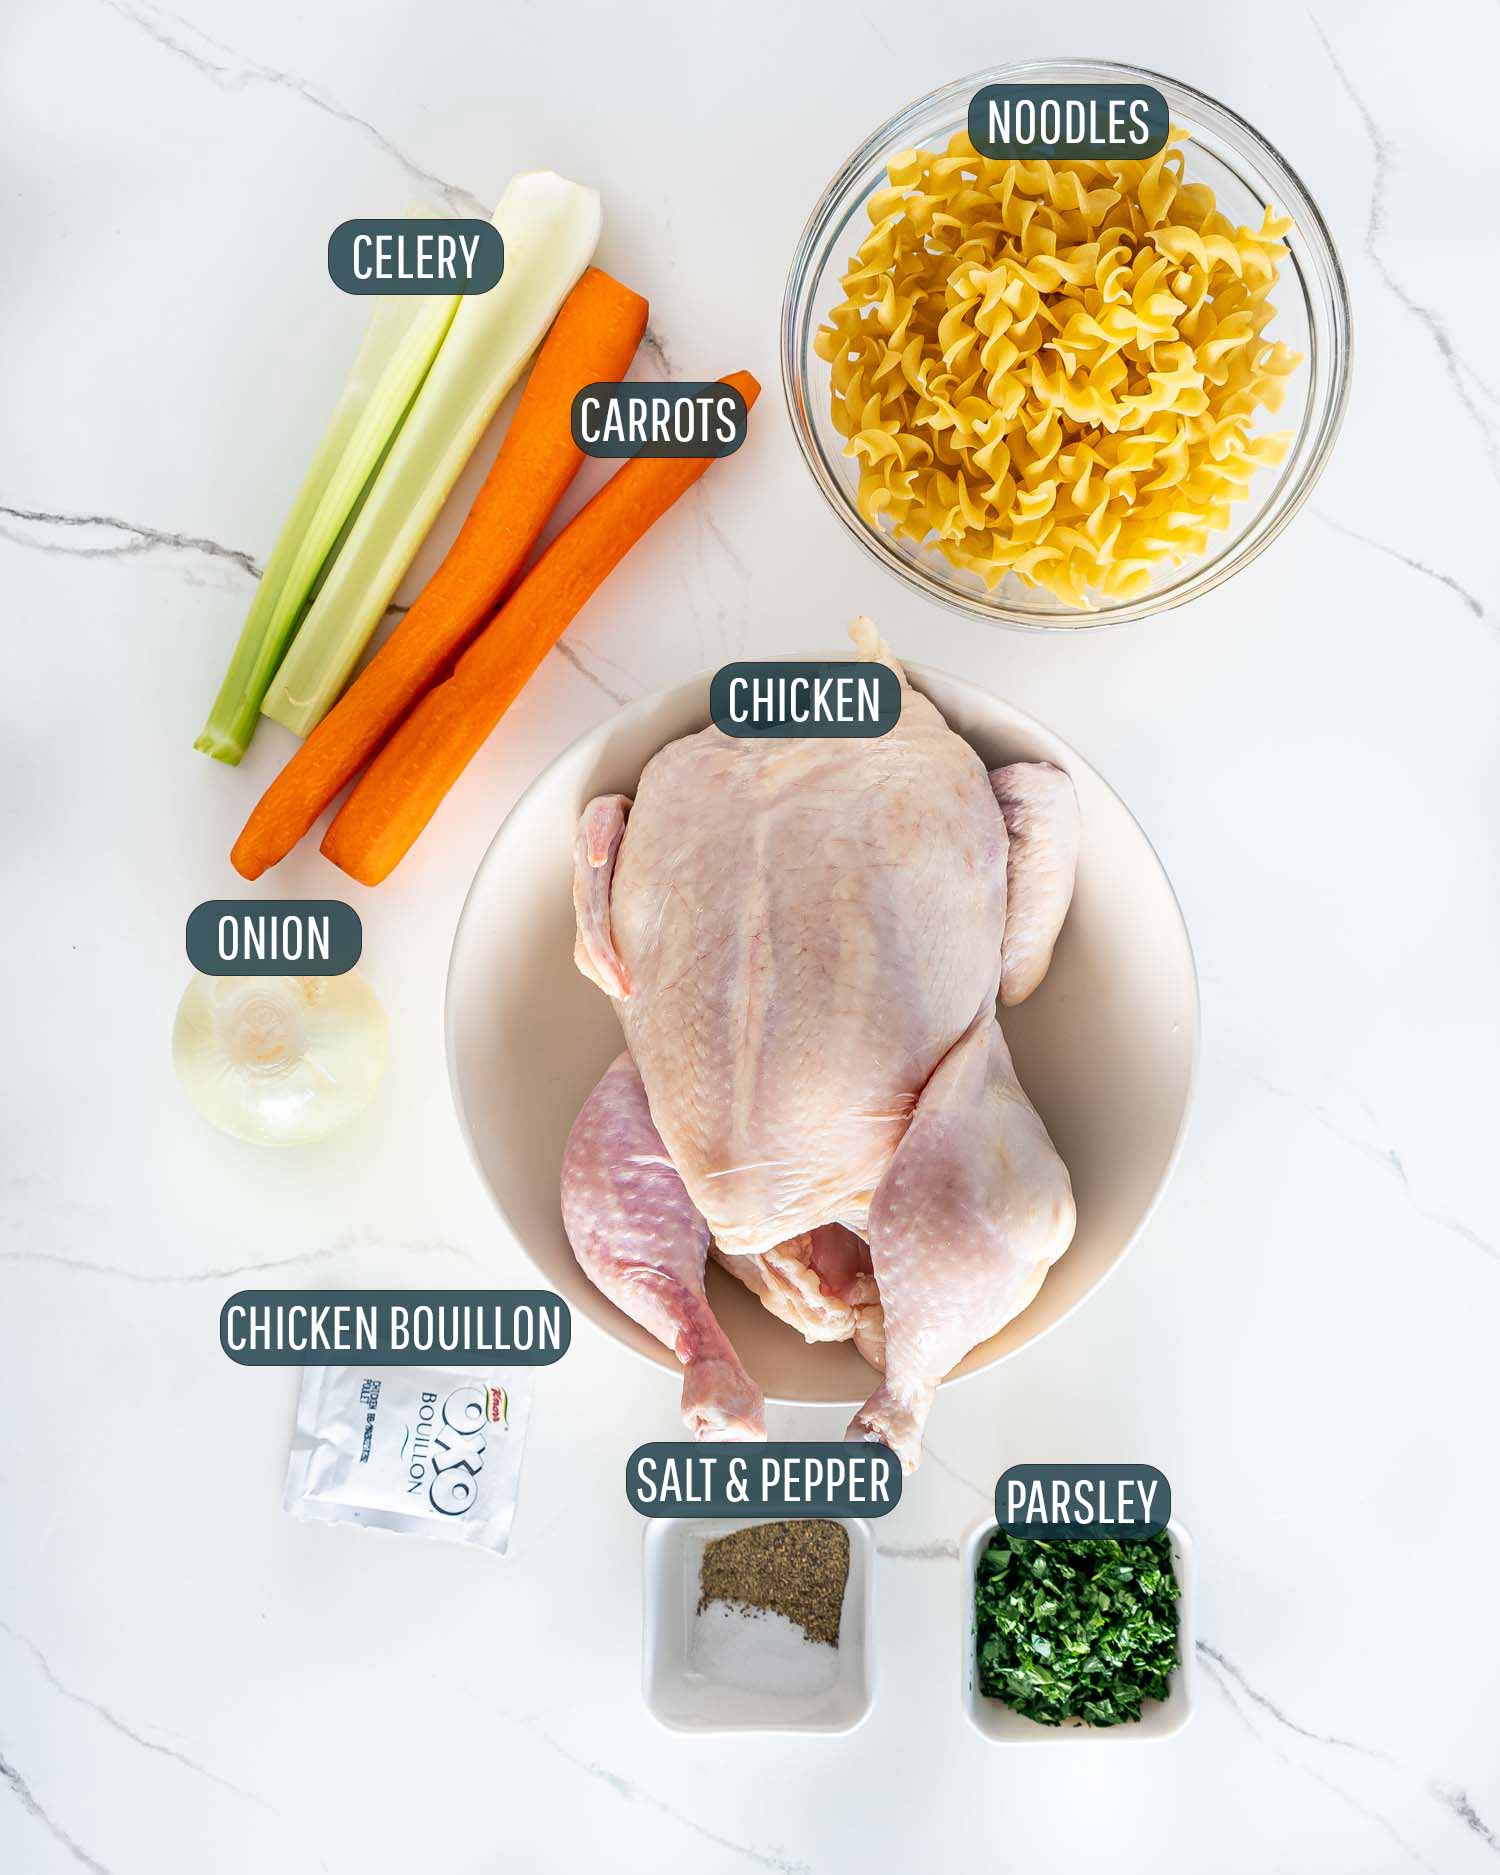 ingredients needed to make homemade chicken noodle soup.